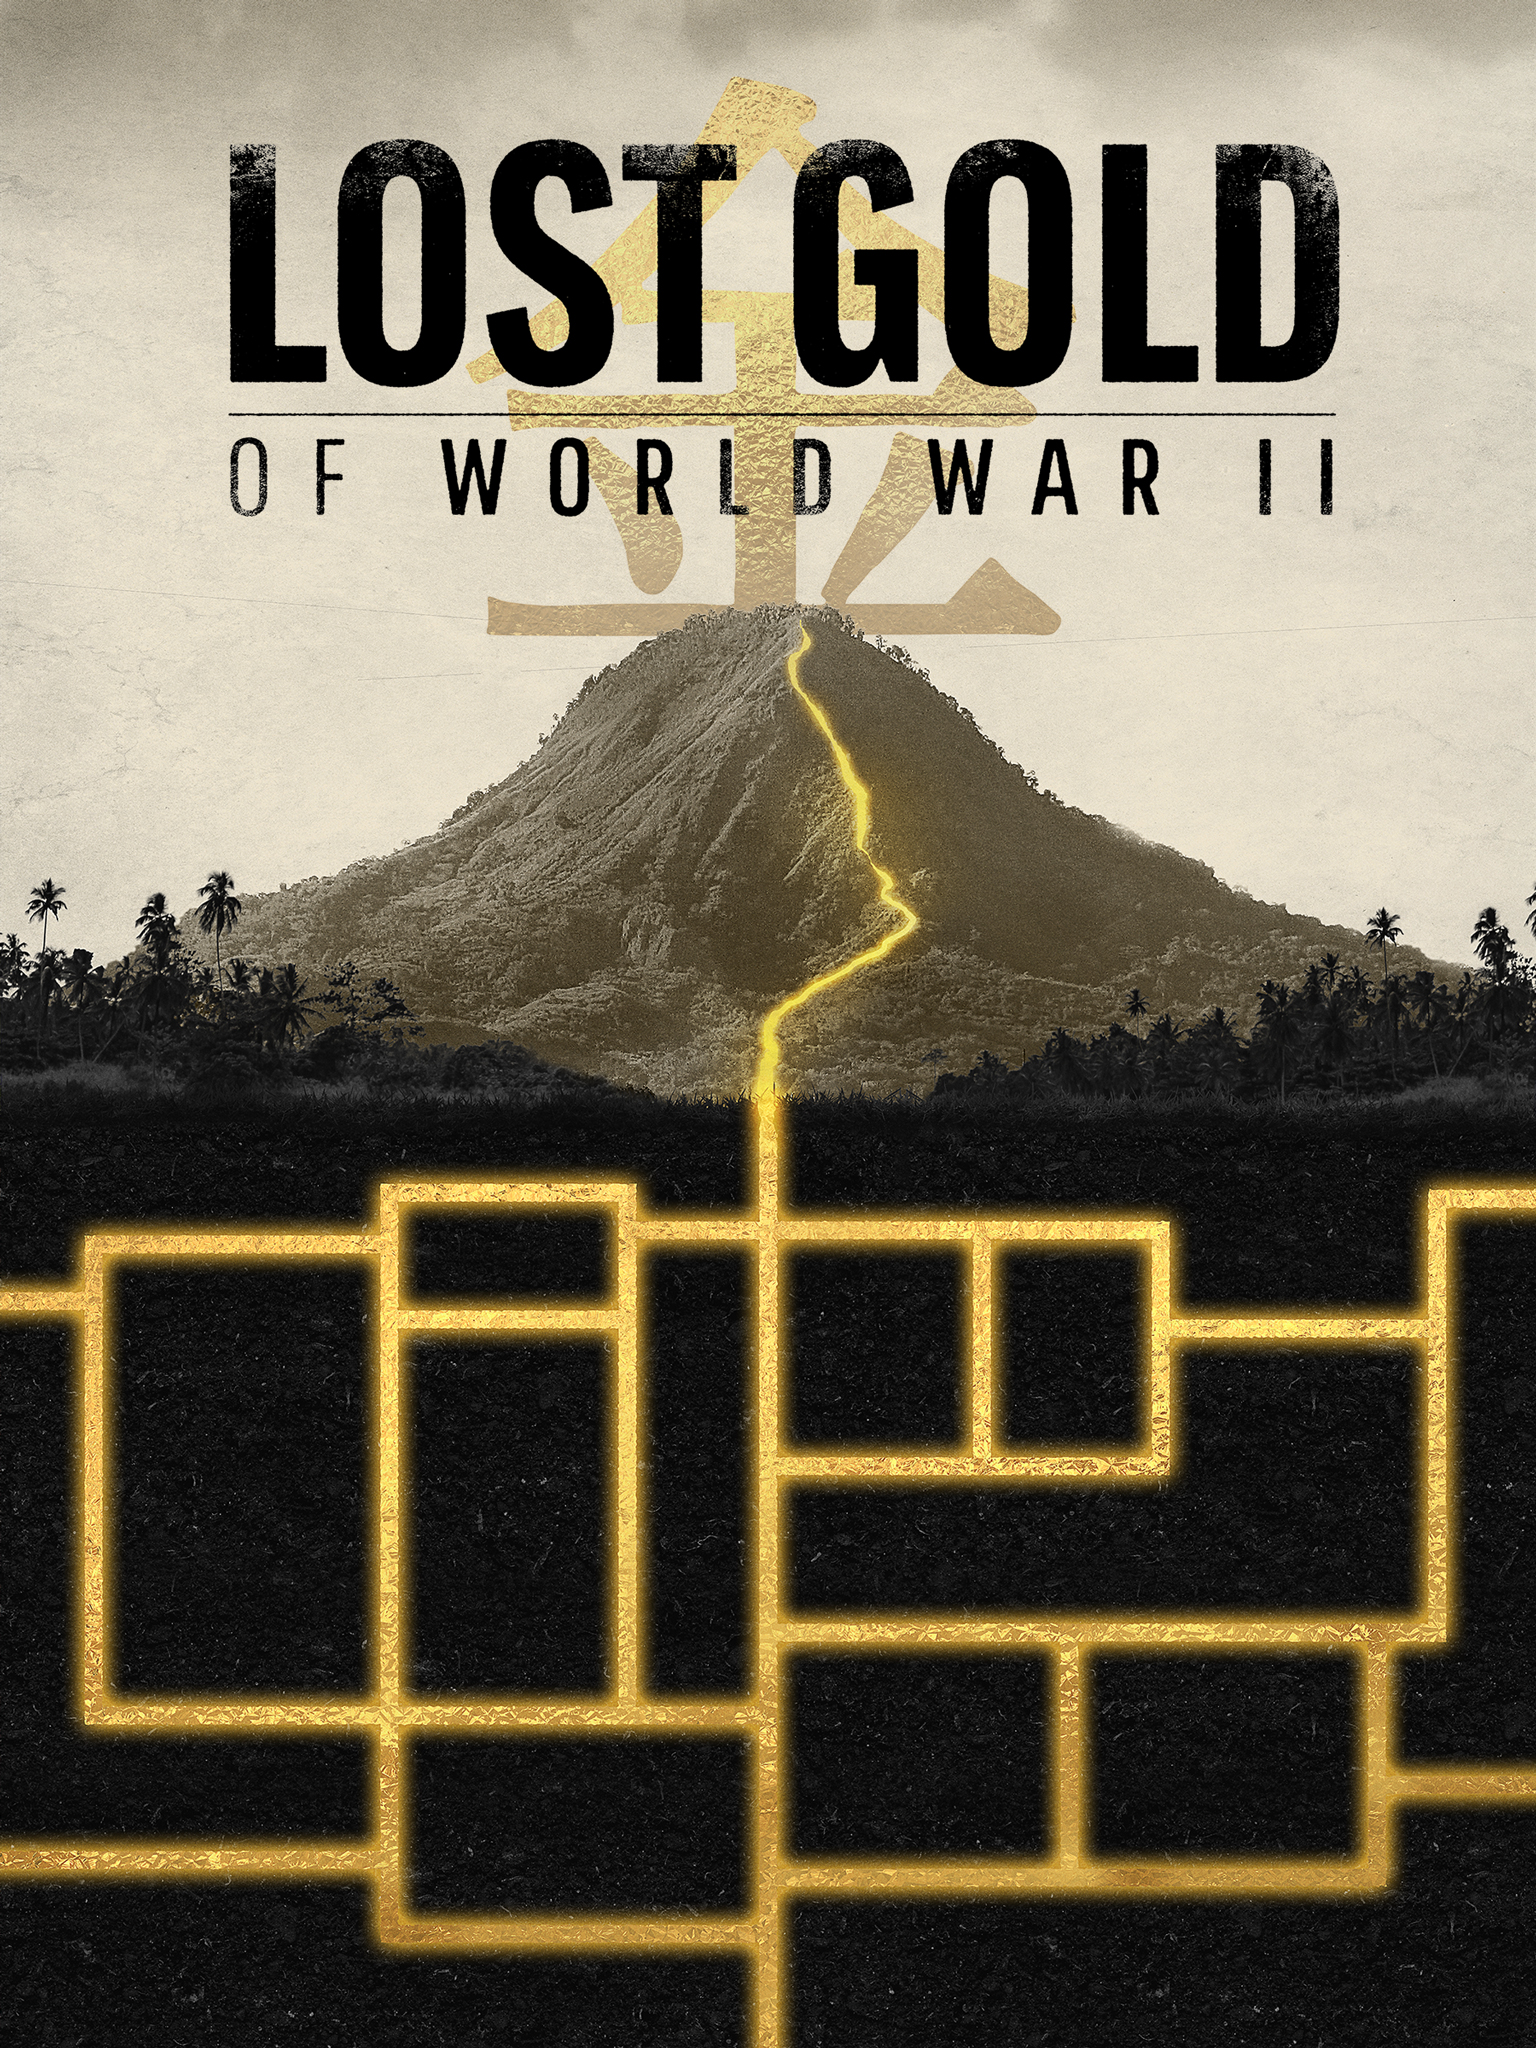 The Lost Gold of World War II